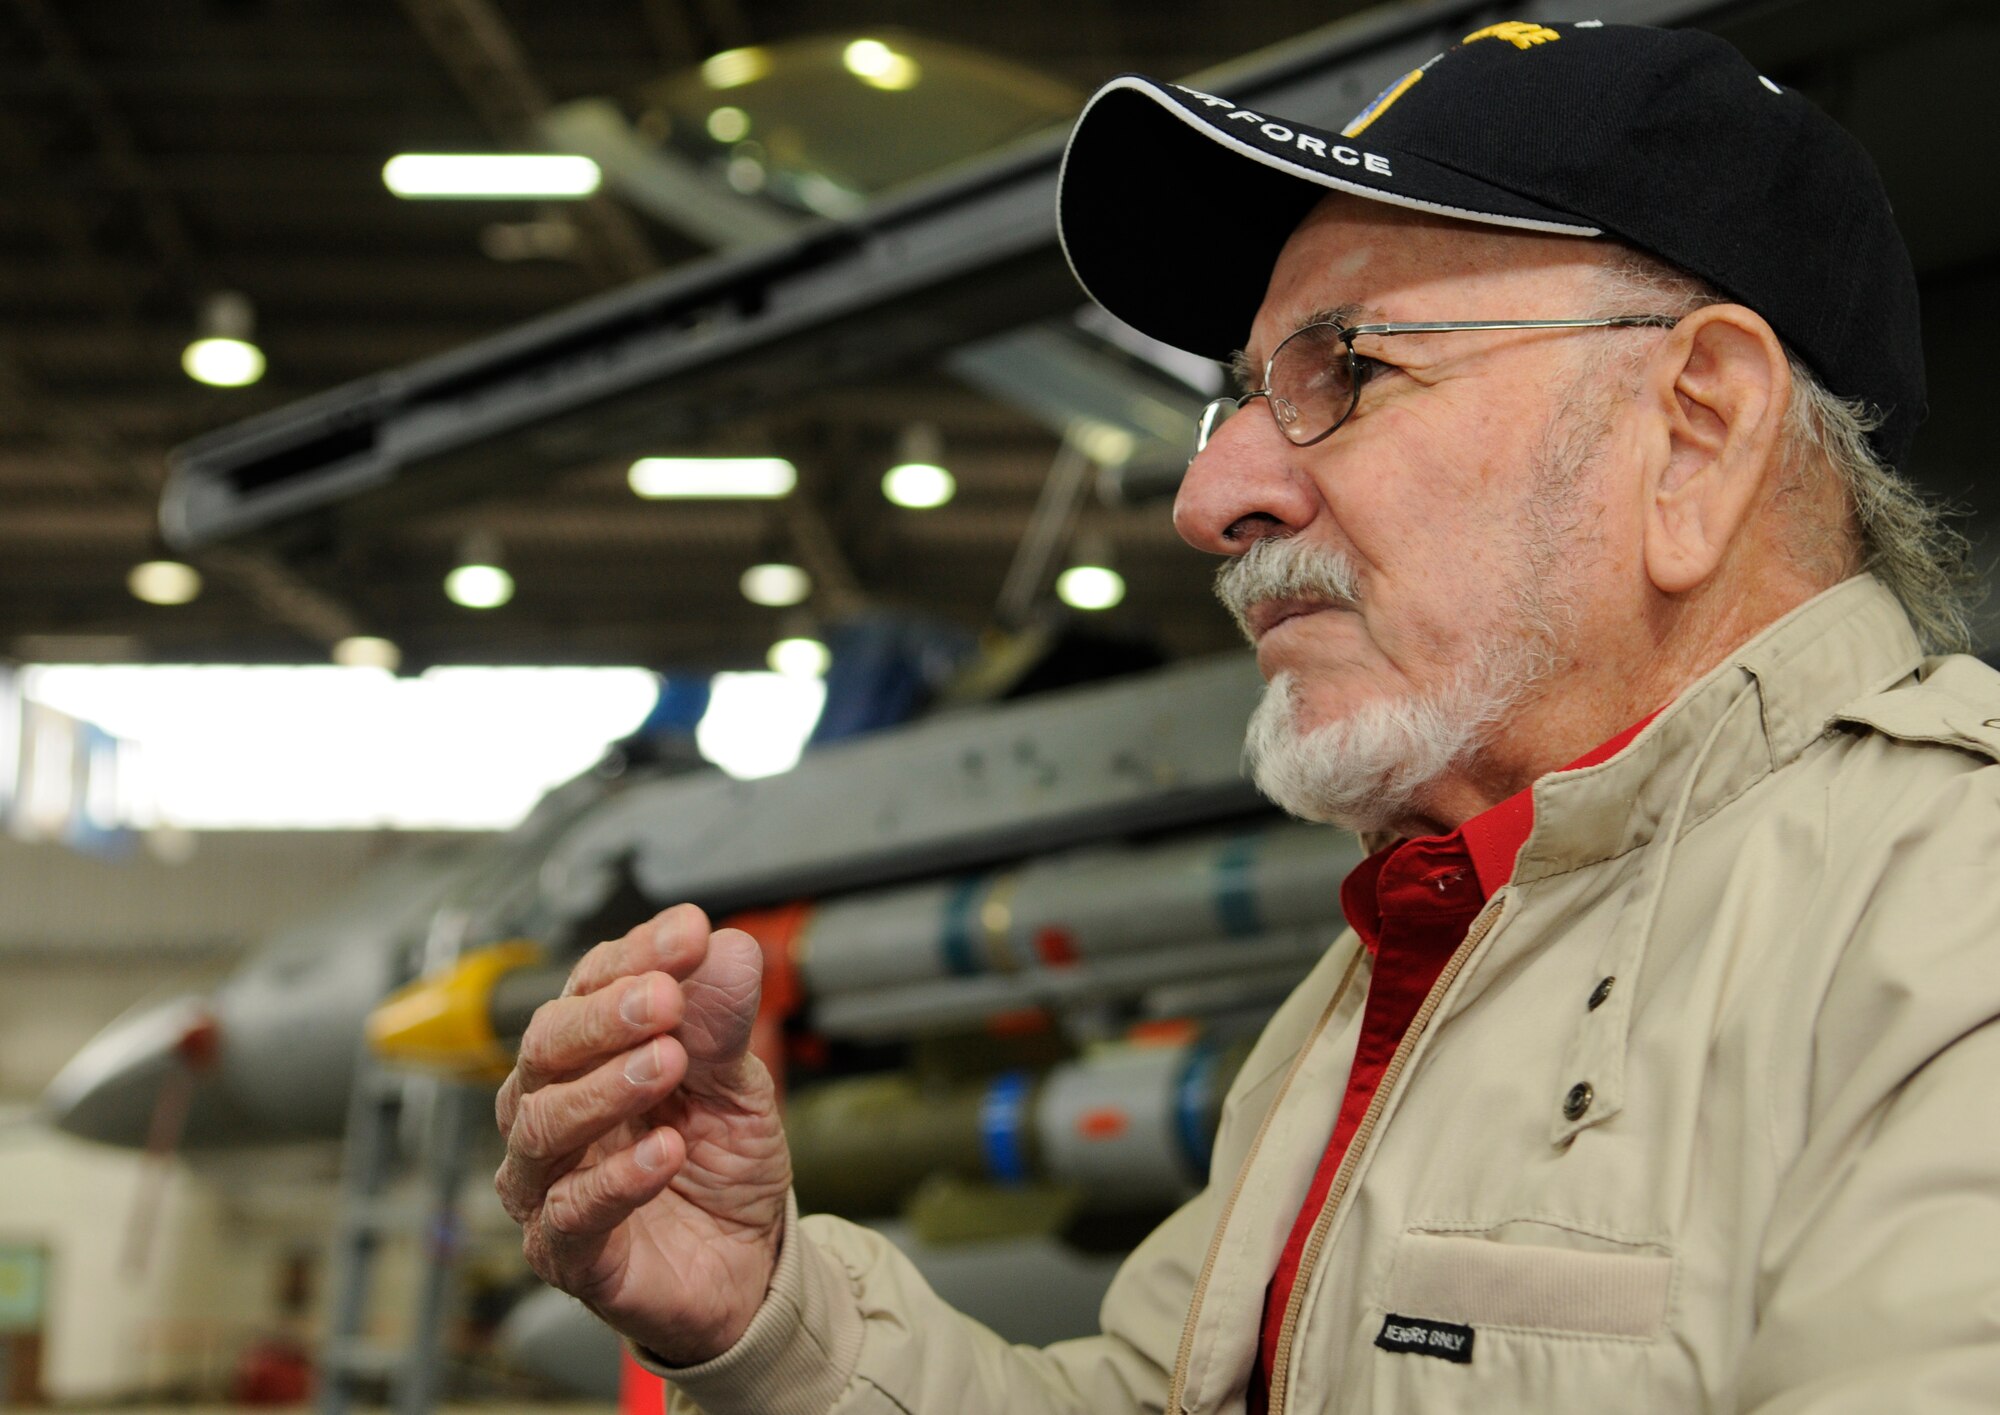 SPANGDAHLEM AIR BASE, Germany – Omar Garcia recounts his days in Germany during an interview May 7. Mr. Garcia was the first crew chief to be stationed at Spangdahlem and worked on the L-5 Sentinel from 1951 to 1954. (U.S. Air Force photo/Senior Airman Benjamin Wilson)